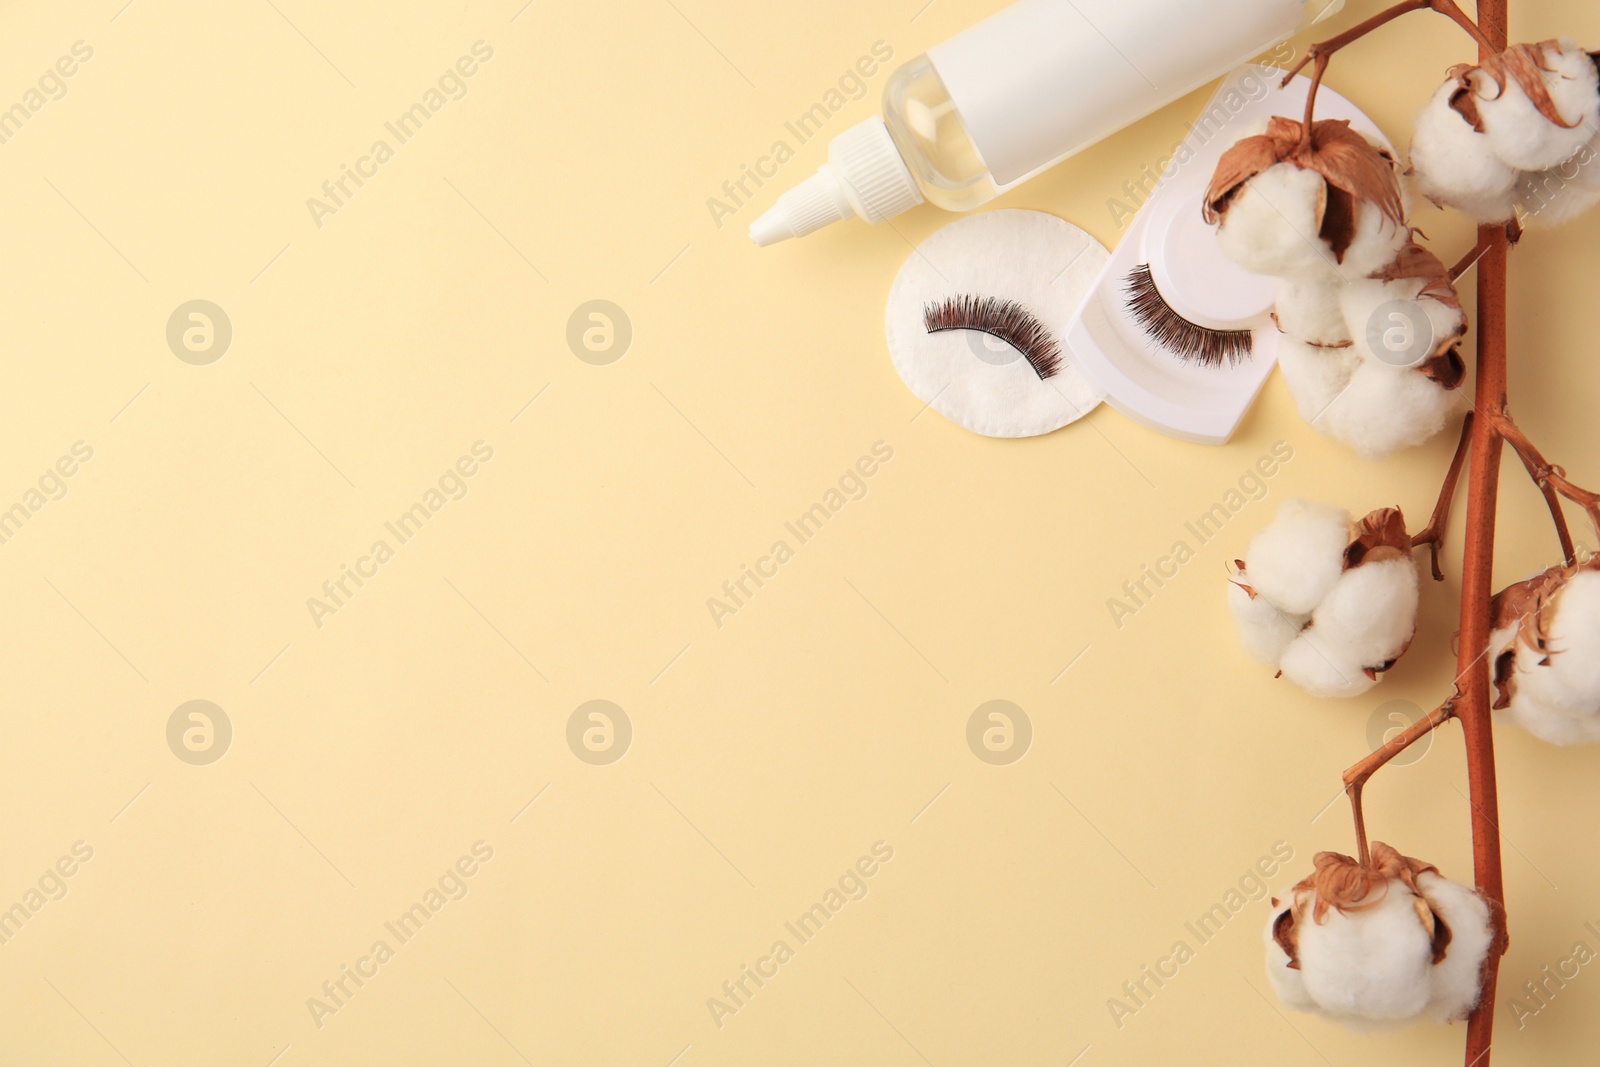 Photo of Bottle of makeup remover, cotton flowers, pad and false eyelashes on yellow background, flat lay. Space for text